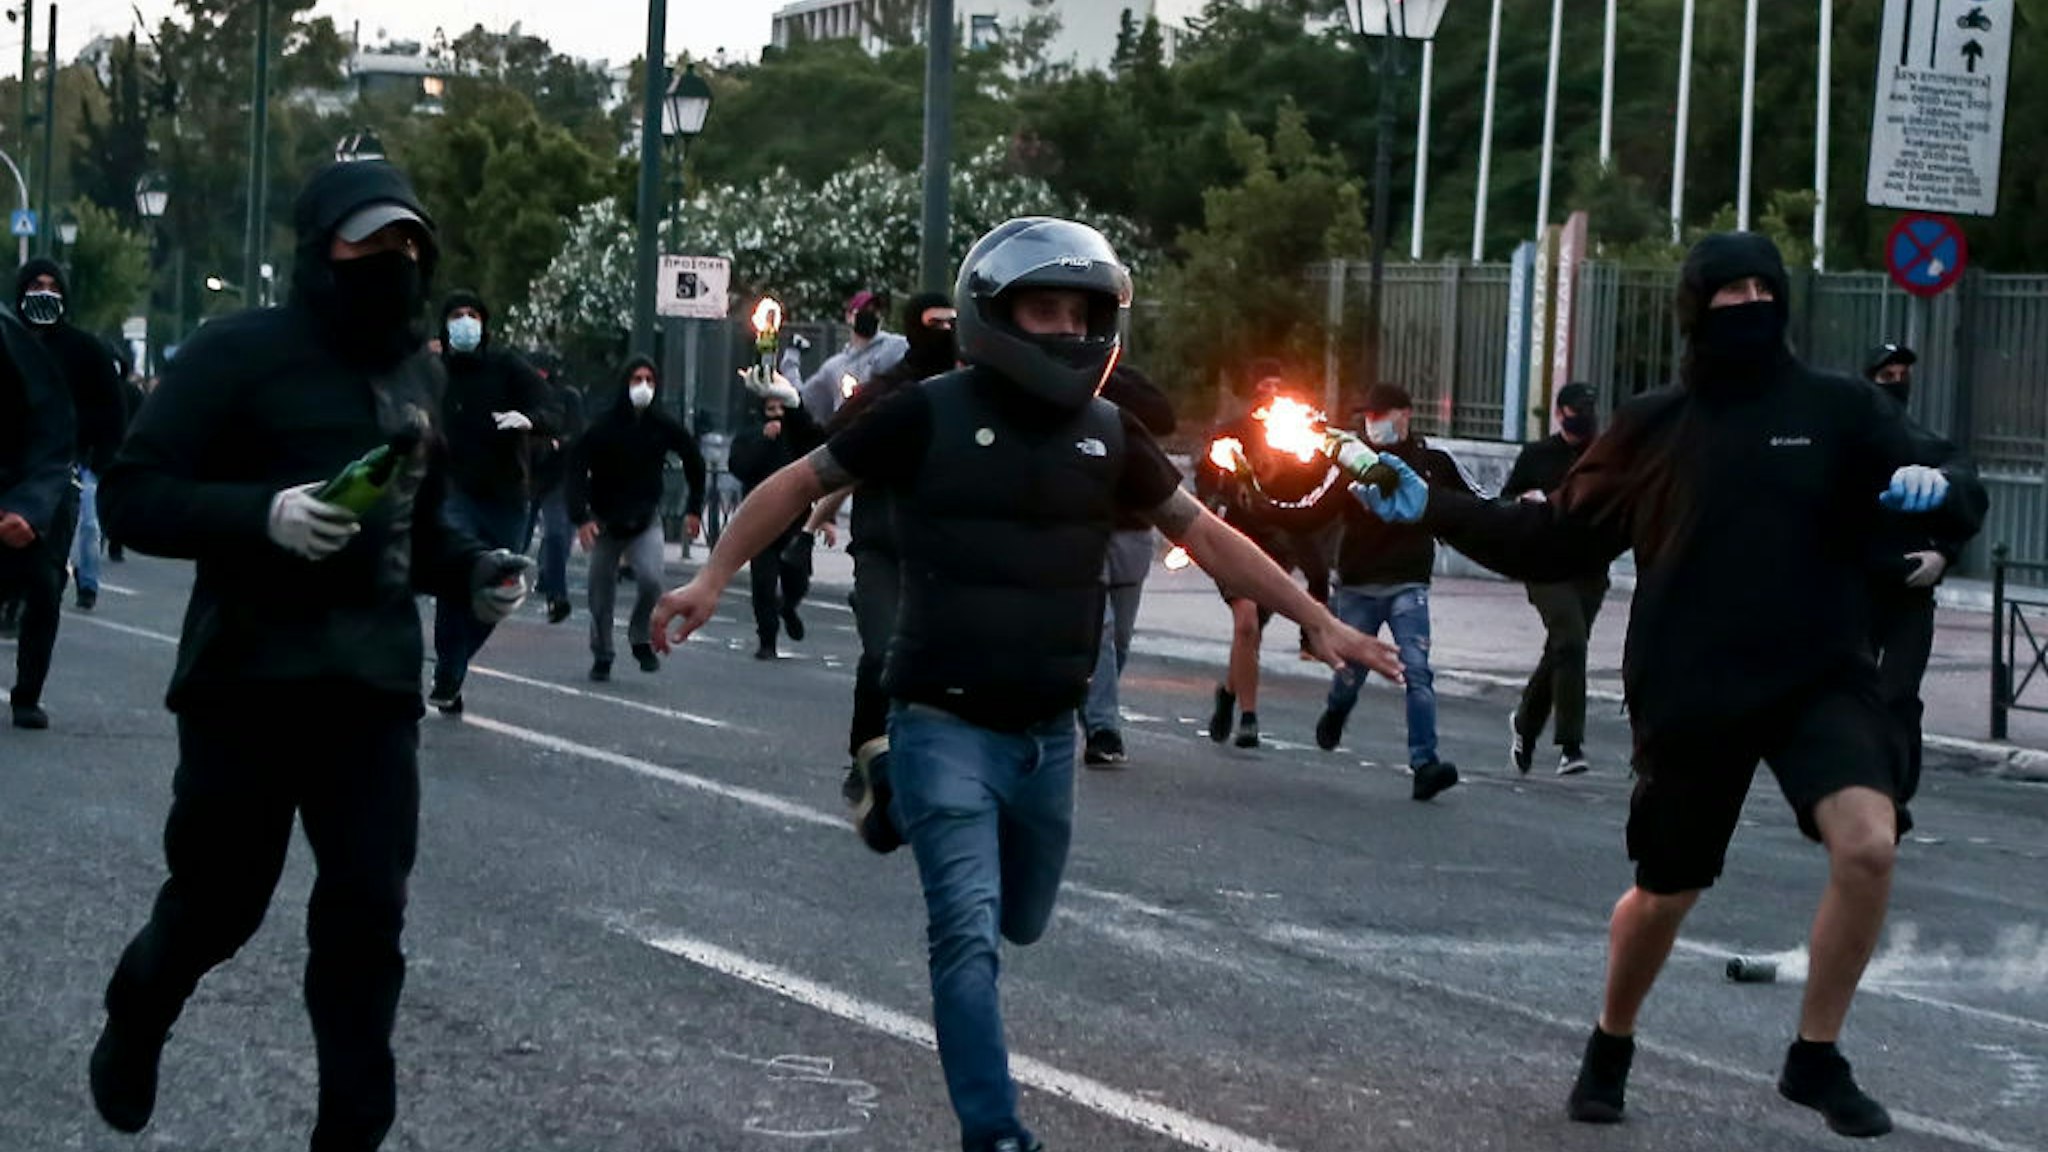 Protesters hurl petrol bombs to riot police officers during a demonstration at the U.S. embassy over the death of George Floyd , in Athens, Greece on June 3, 2020. (Photo by Panayotis Tzamaros/NurPhoto)